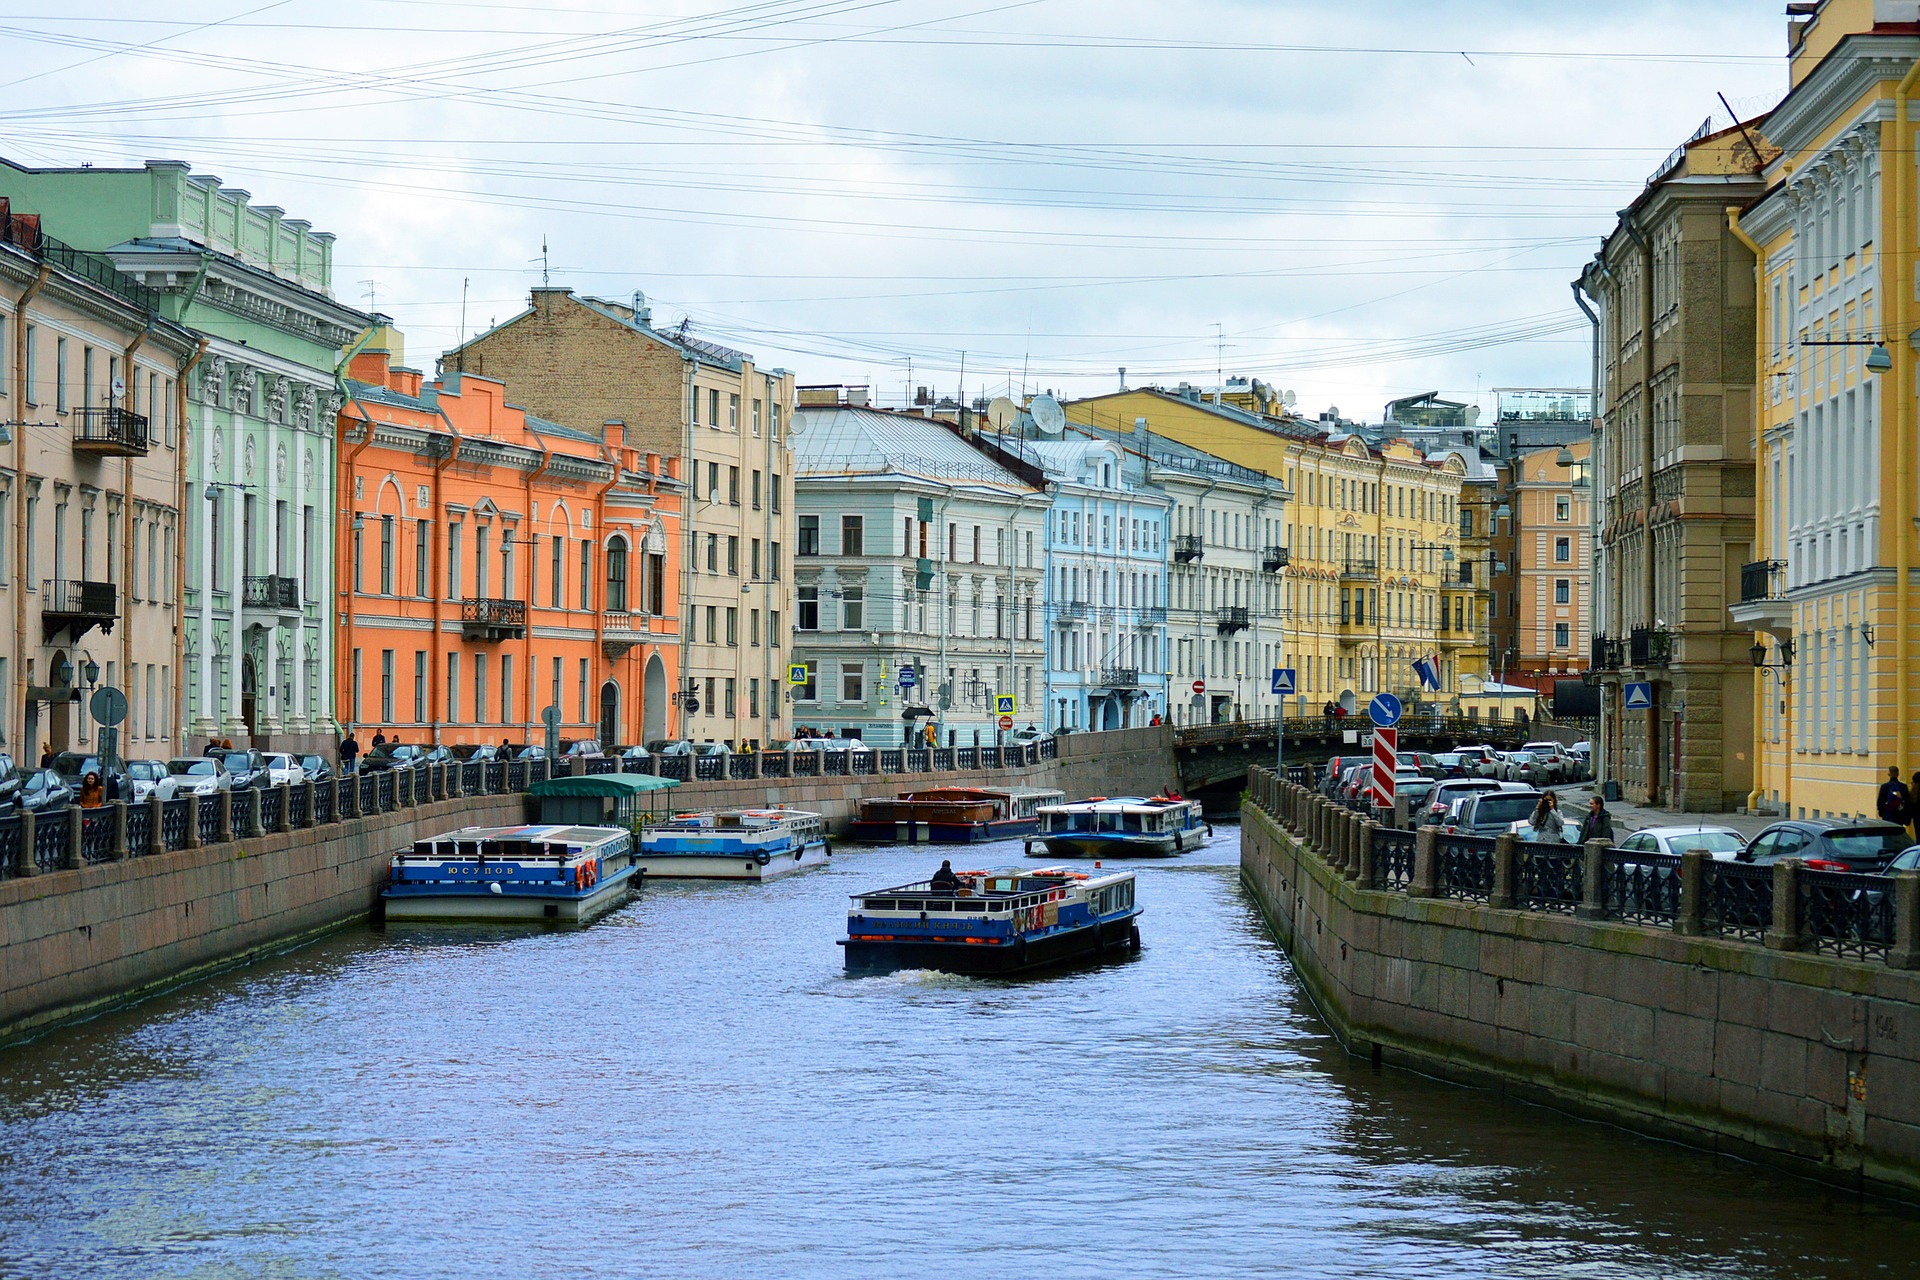 Saint Petersburg is also know as the "Venice of the North" because the large number of canals within the city.